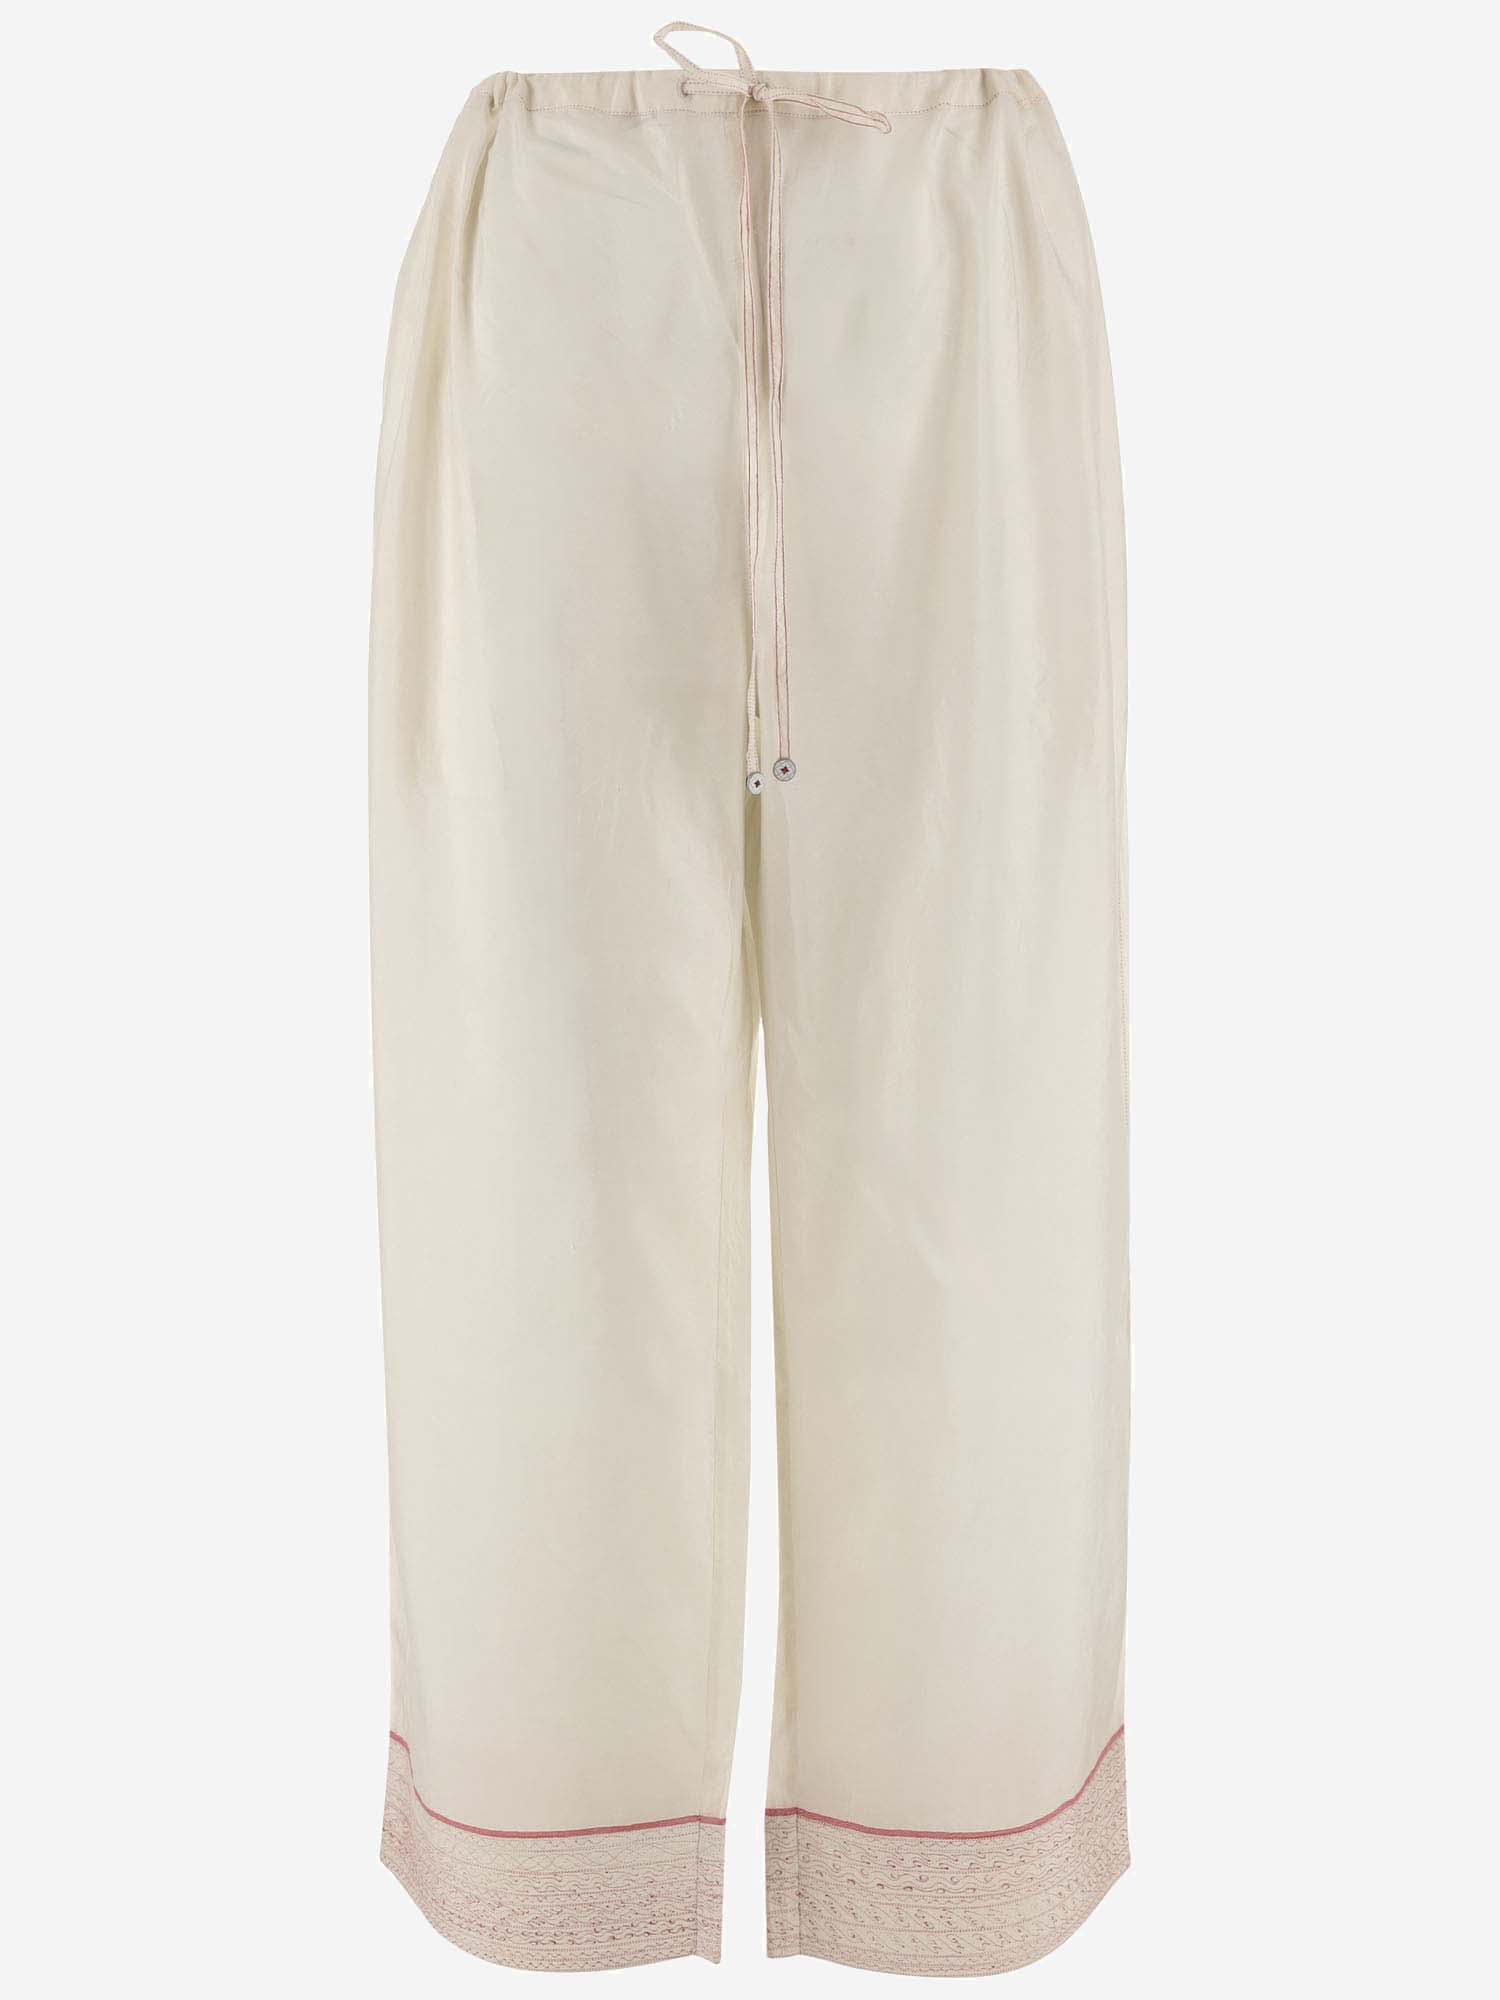 Péro Trousers Made Of Pure Silk In Neutral